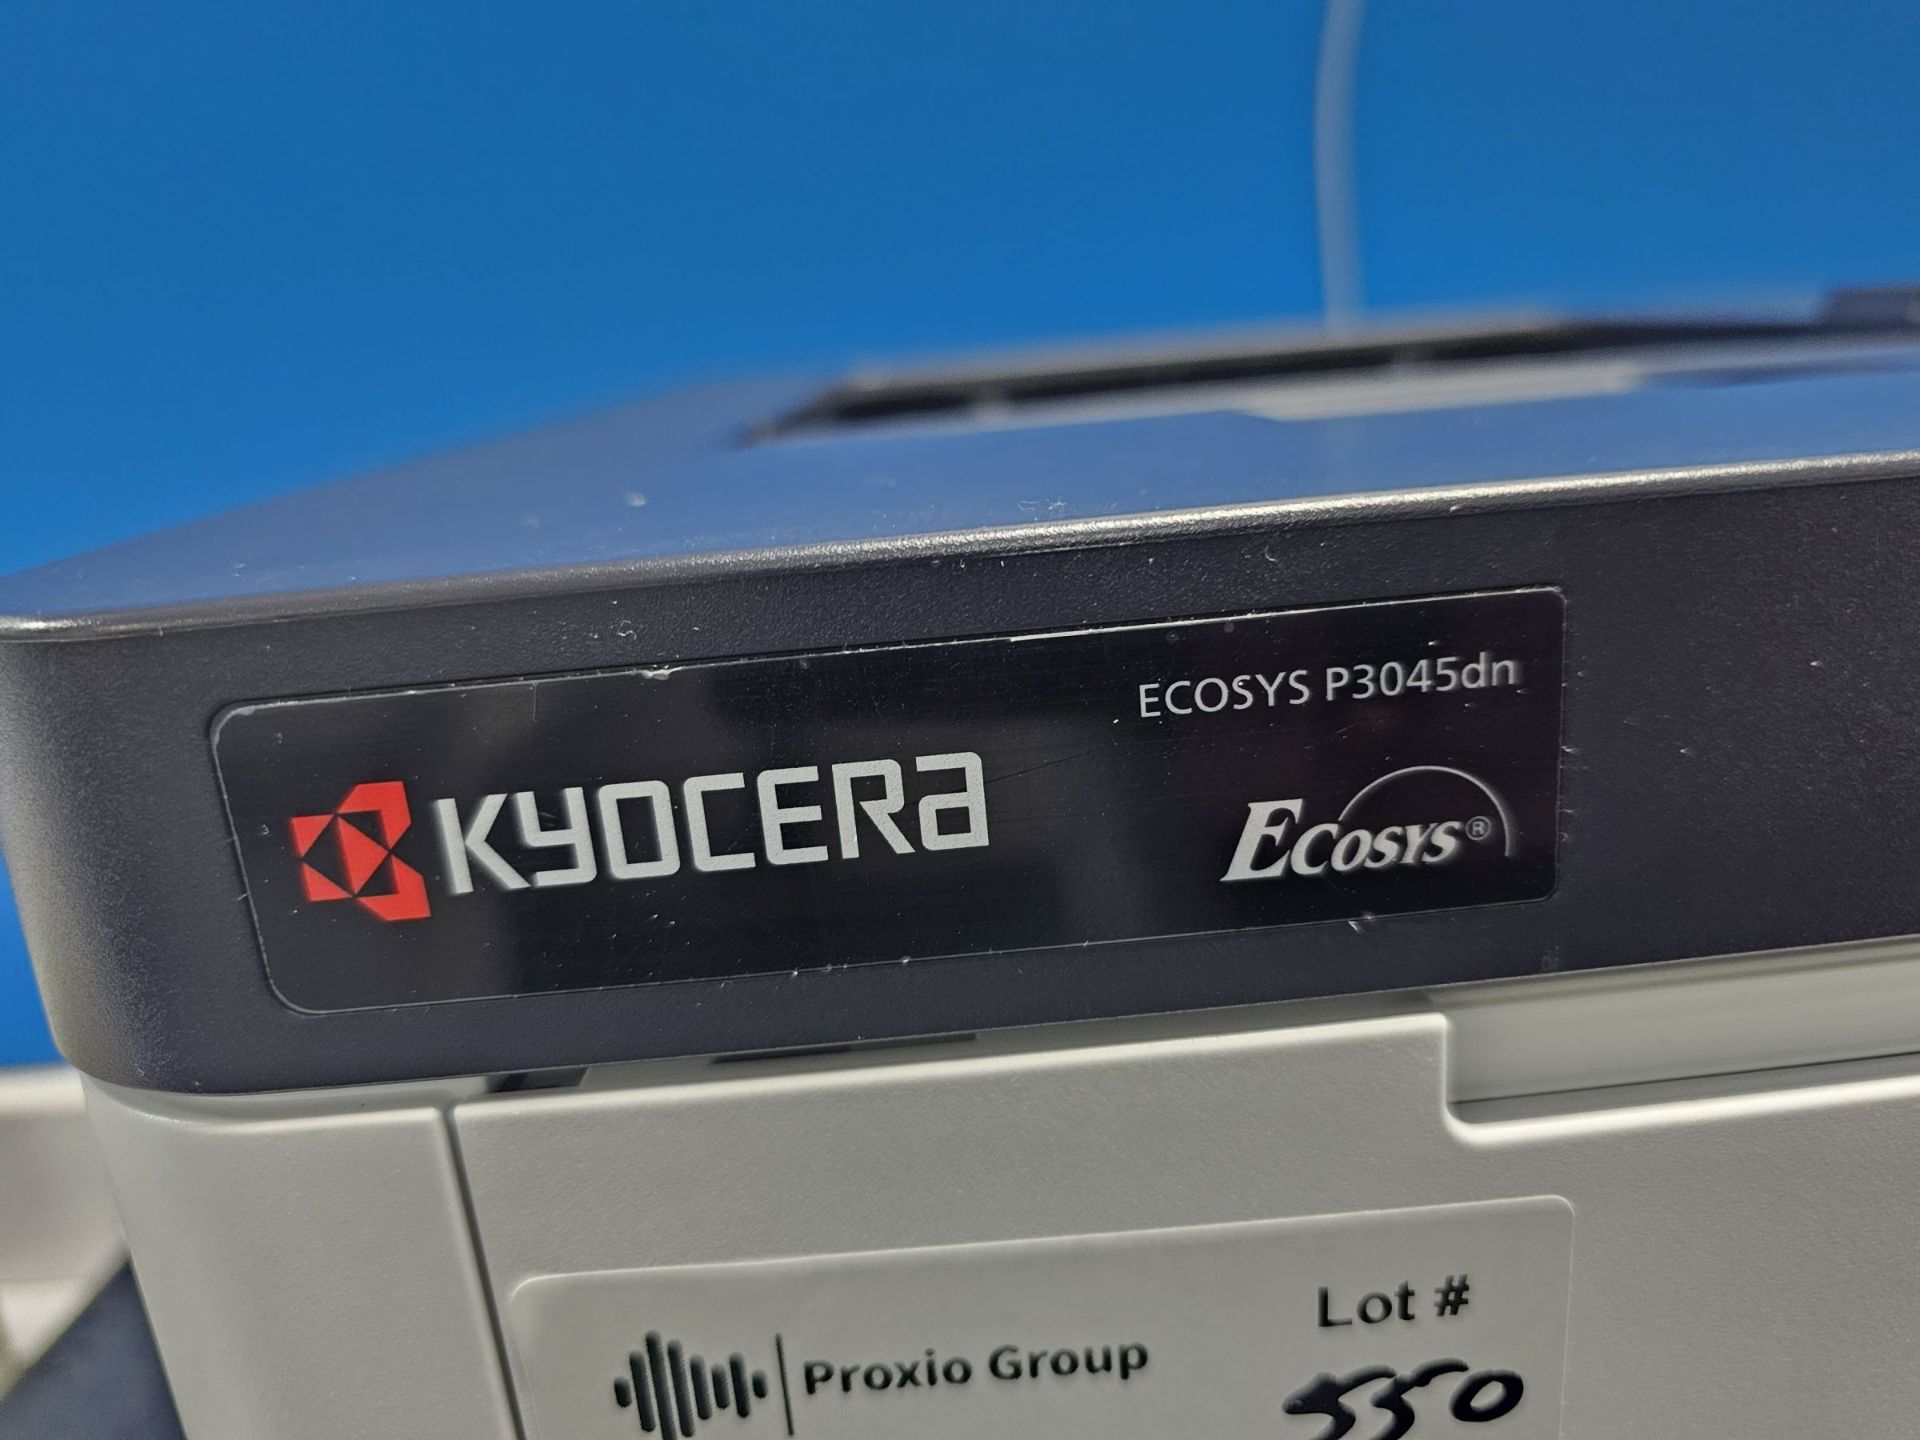 Kyocera Ecosys Series Model P3045dn Duplexing Network Laser Printer - Image 4 of 5